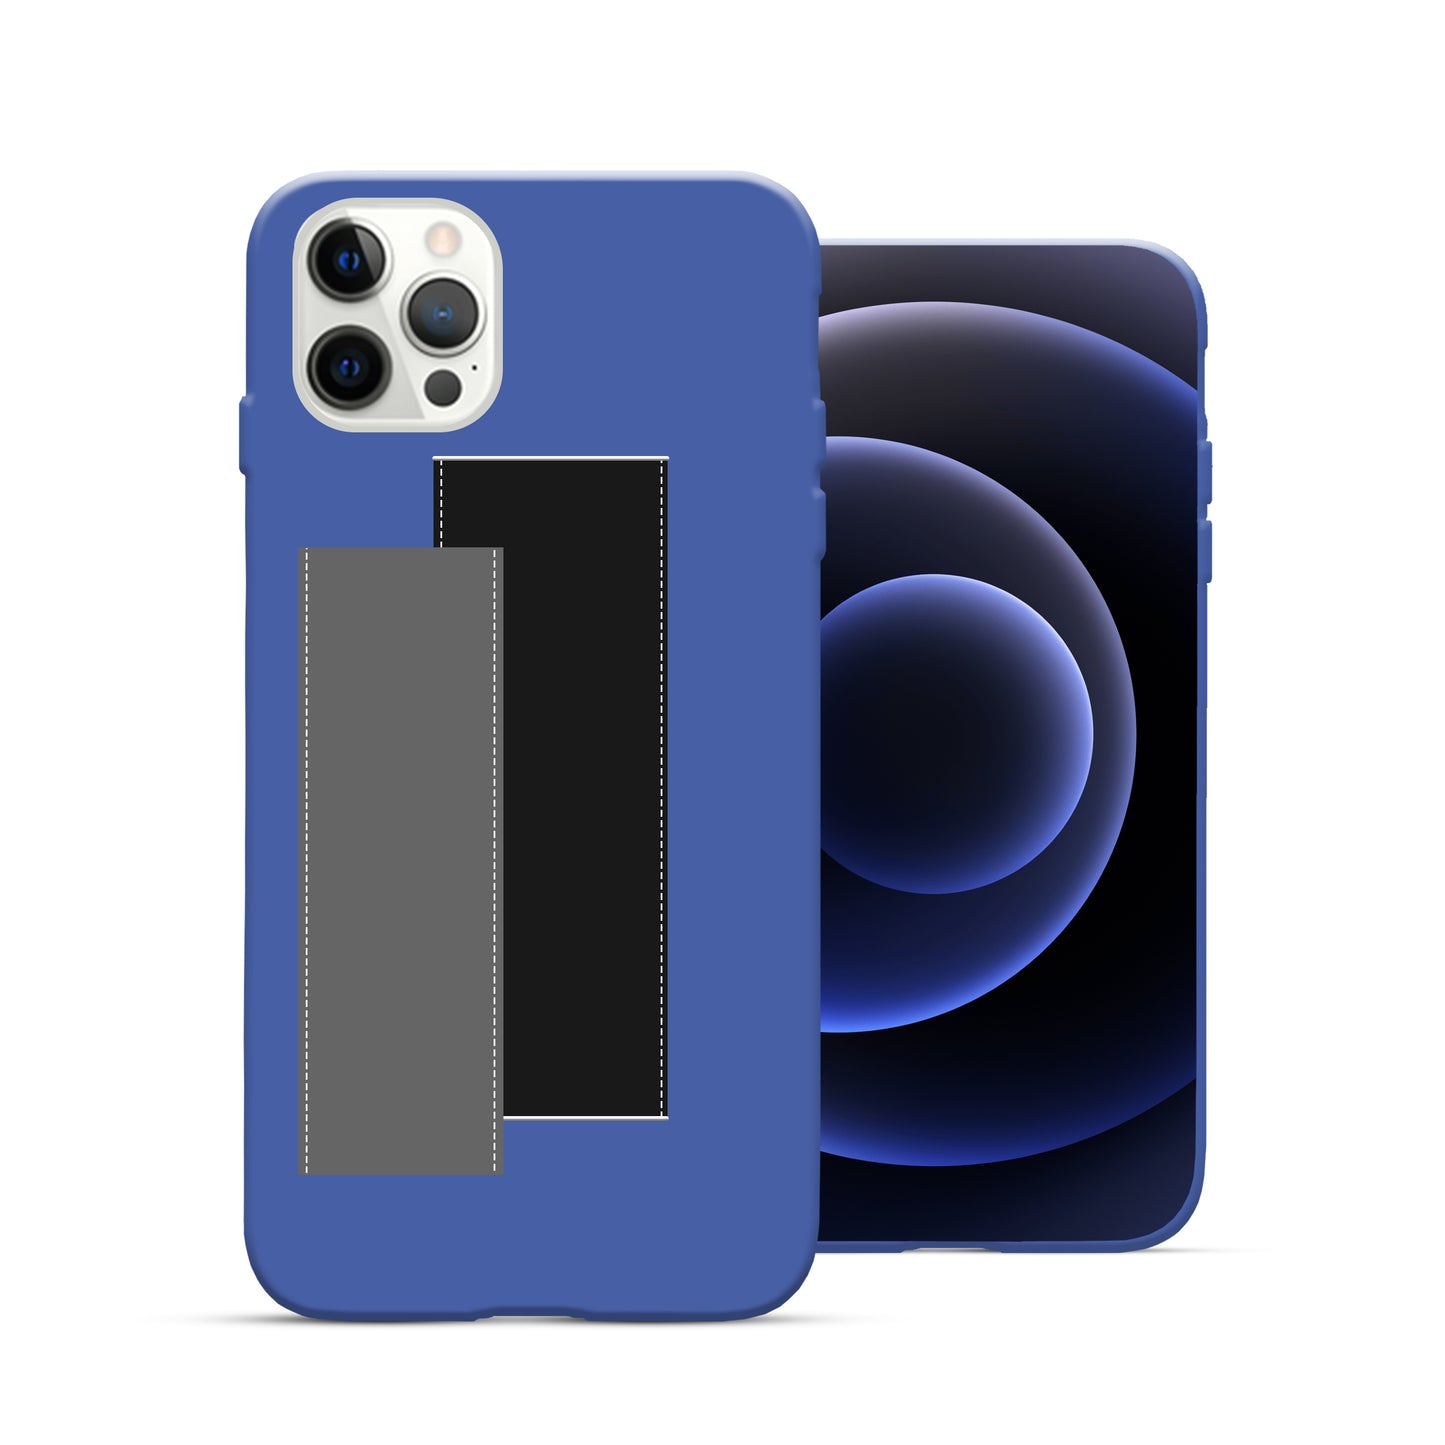 Finger Loop Phone Case For iPhone 12 & 12 Pro Blue With Black & Grey Strap